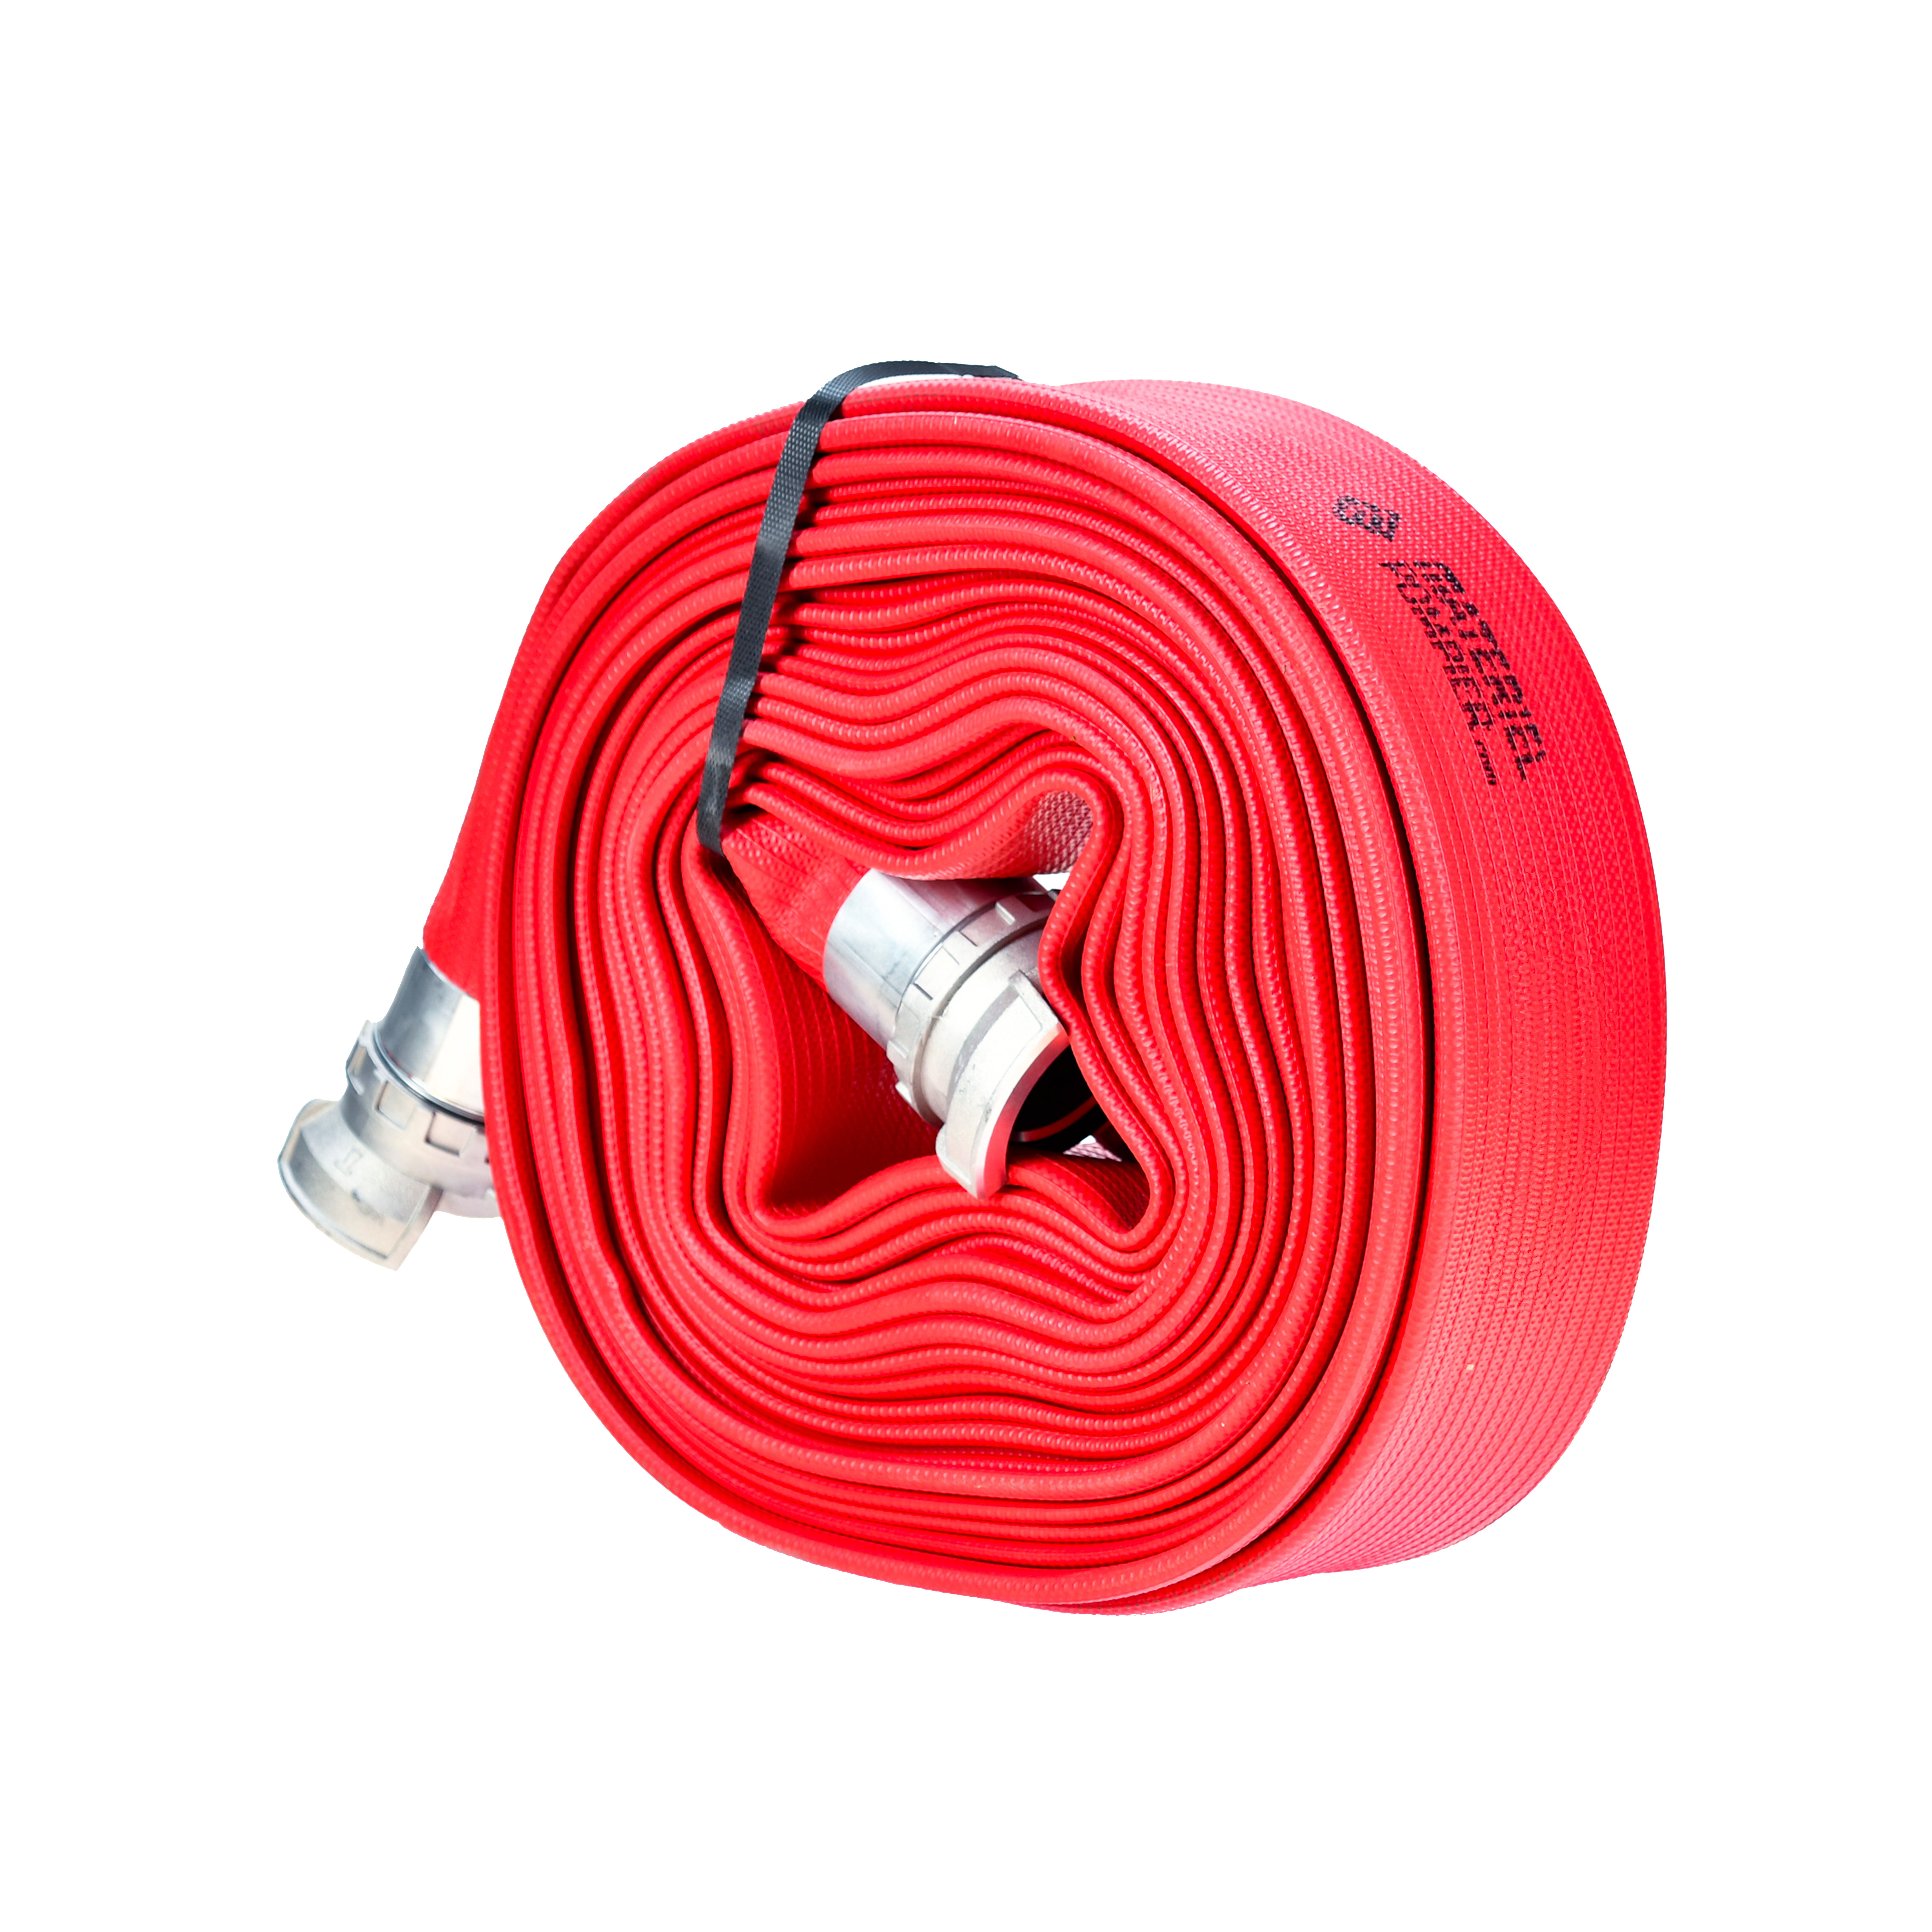 TuyaFlattenable EUROFLEX fire hose for professional intervention. Available in several versions equipped with Teflon type treatment with fittings.